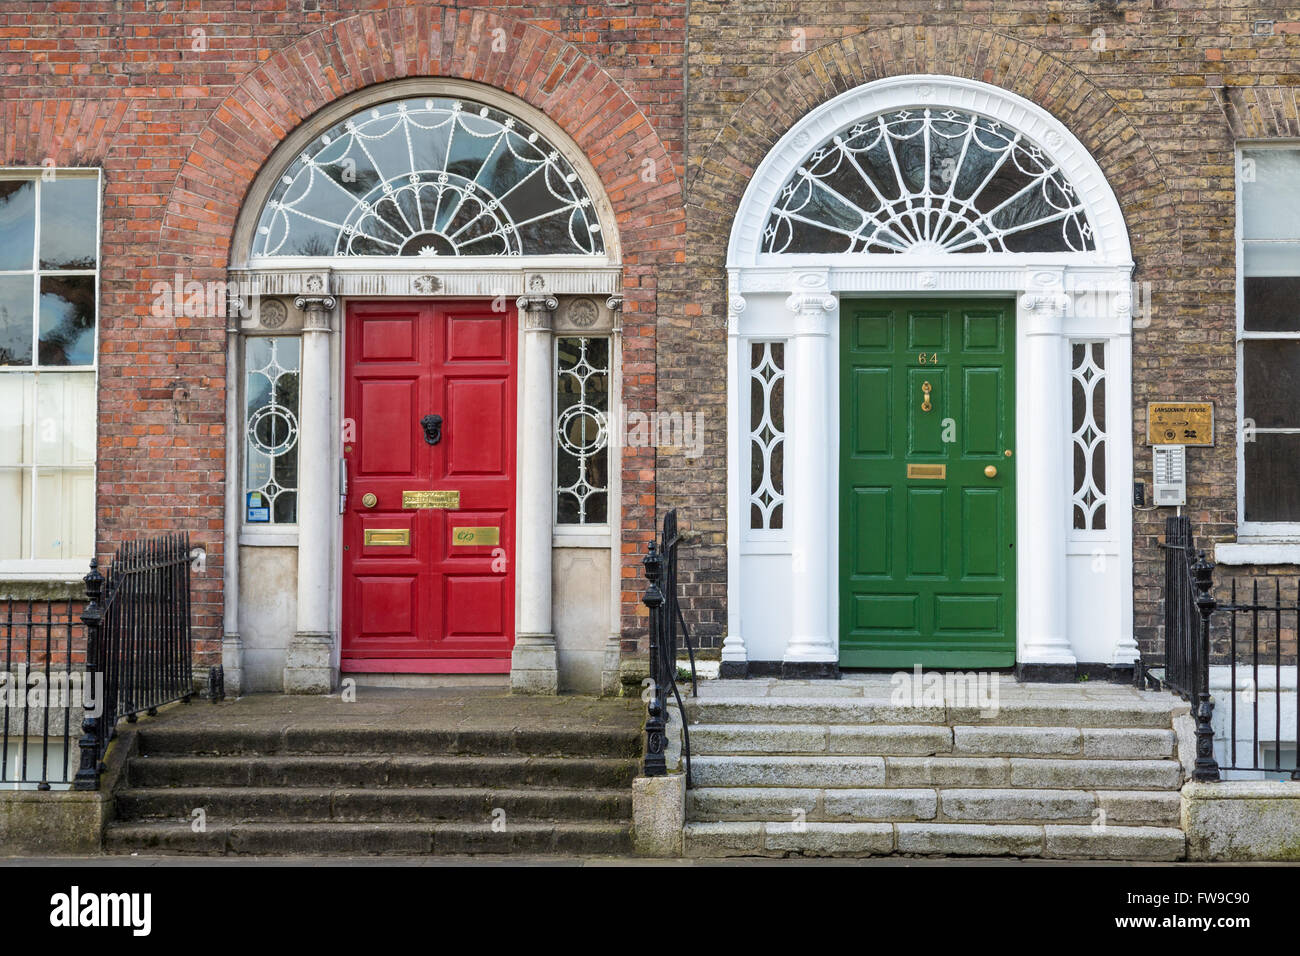 Georgian red and green doors with landings, Merrion Square, Dublin, Ireland Stock Photo